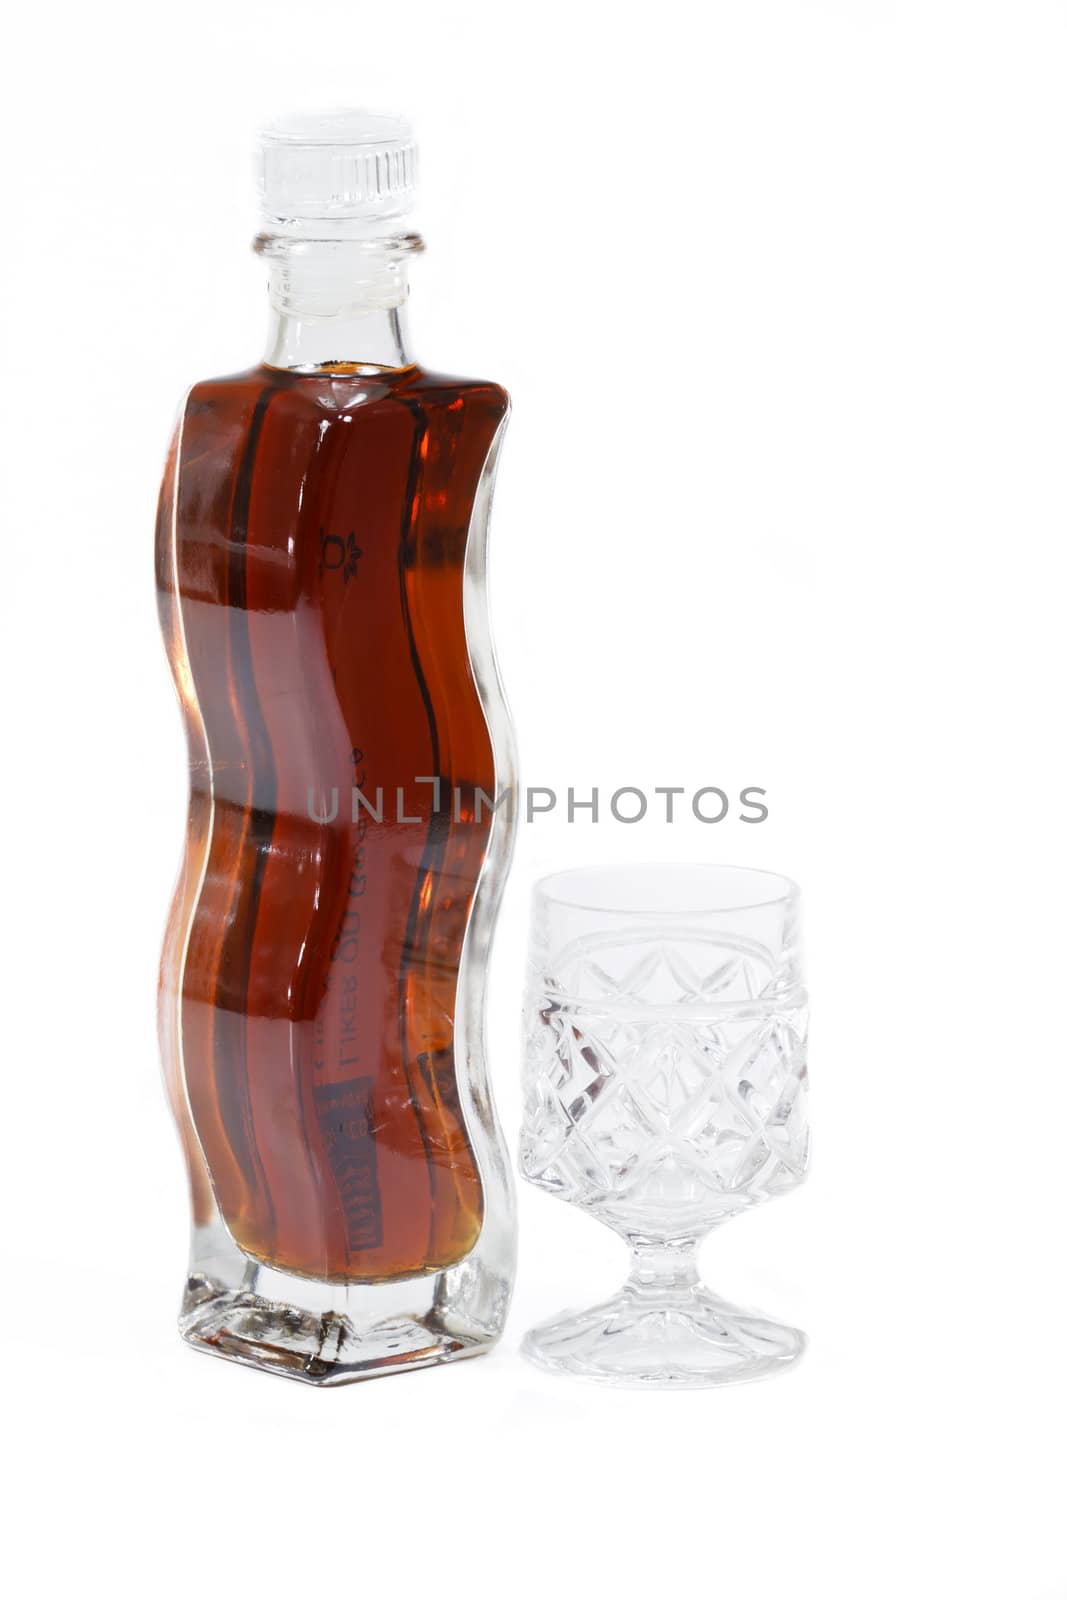 Liquor Bottle with glass isolated on white background